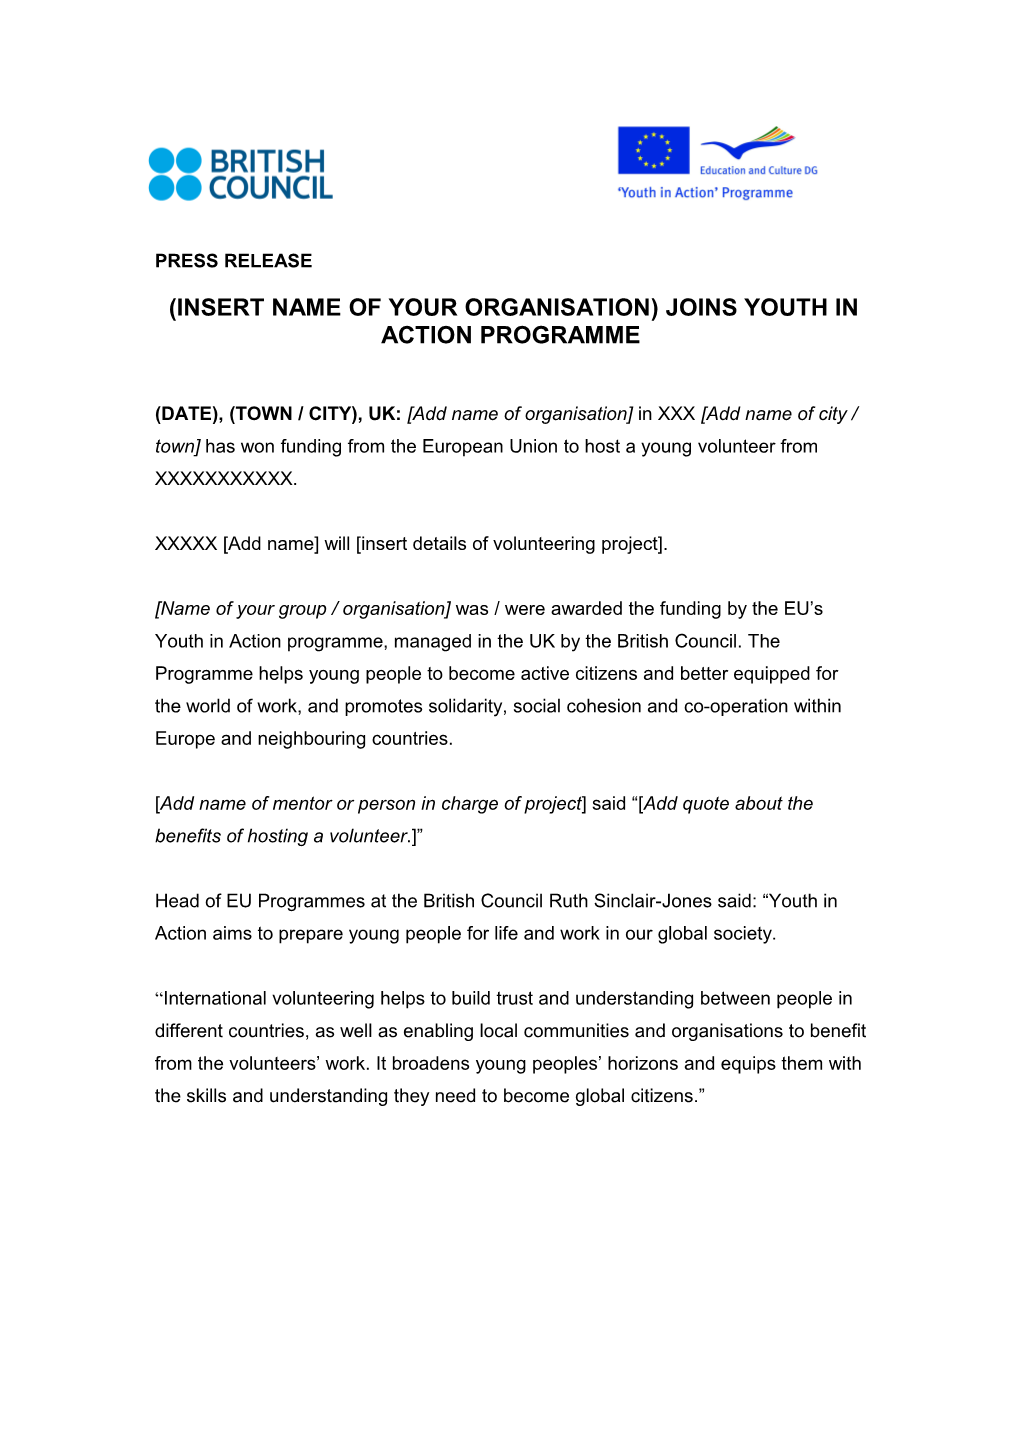 (Insert Name of Your Organisation) Joins Youth in Action Programme